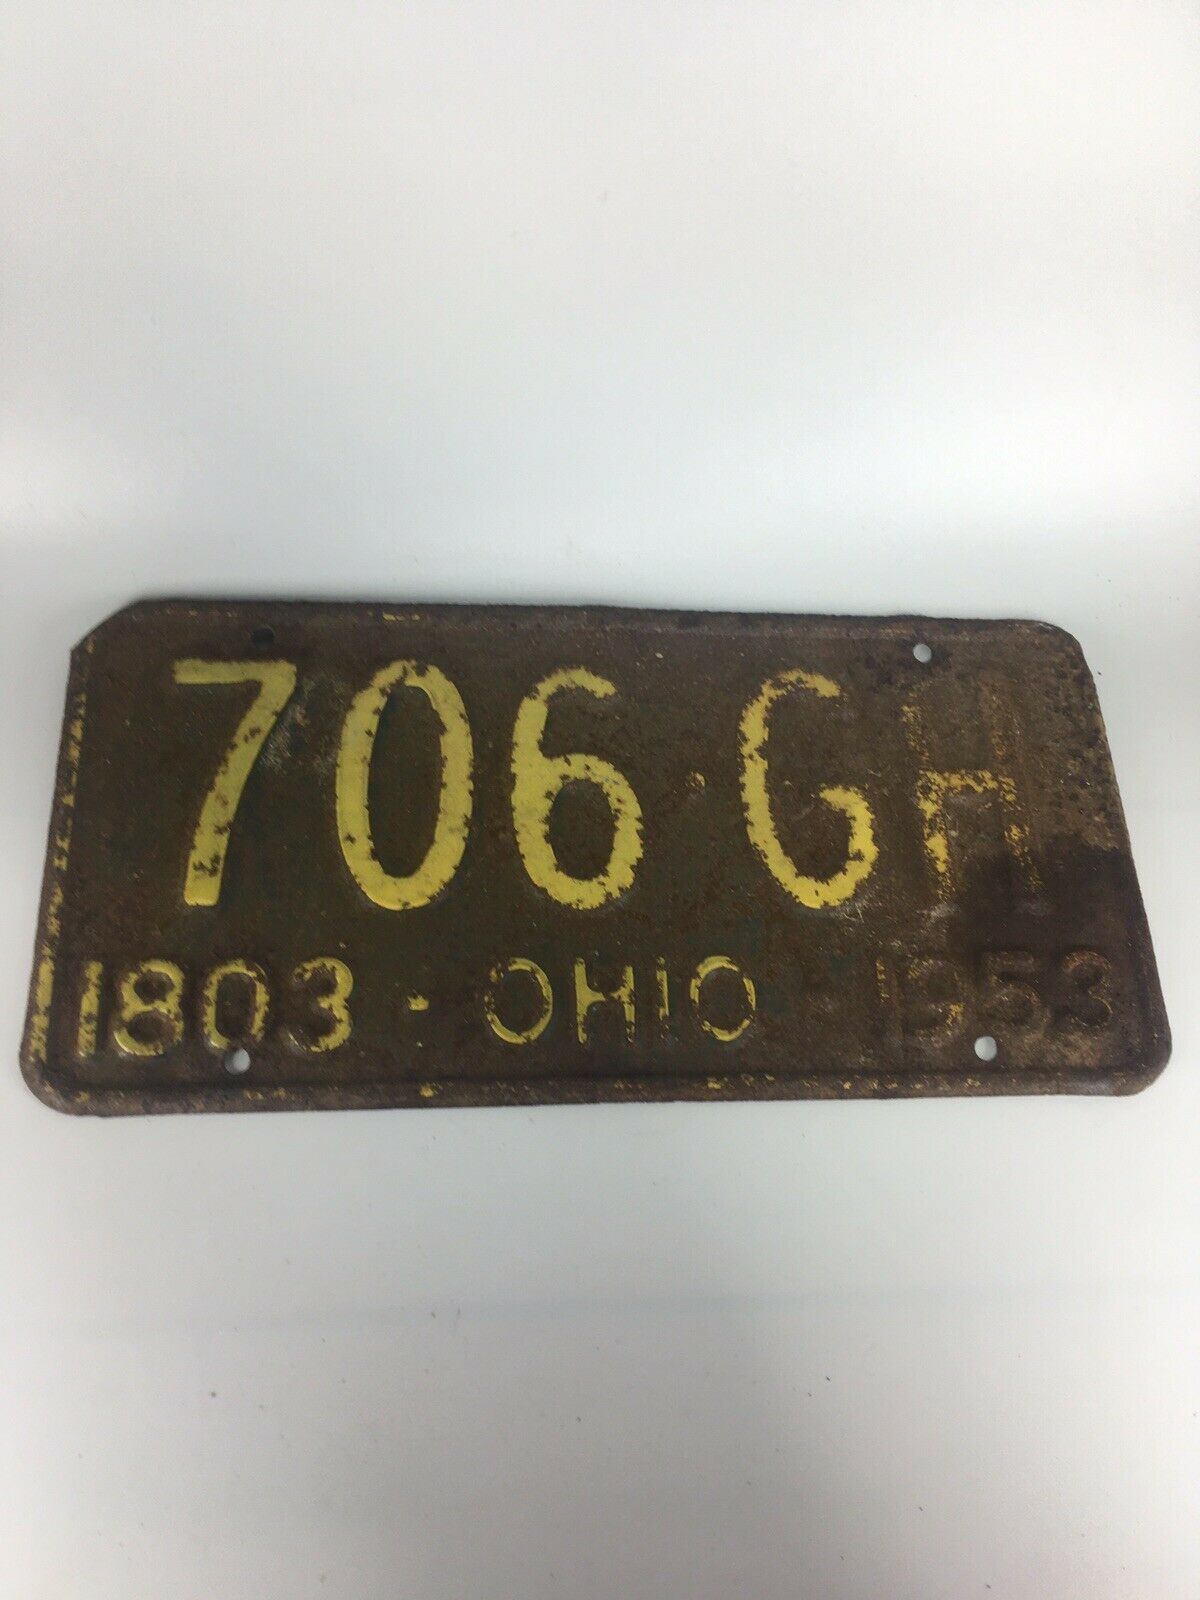 1953 Ohio License Plate 706-gh Rusty Dirty Ready To Display Oh 150 Years